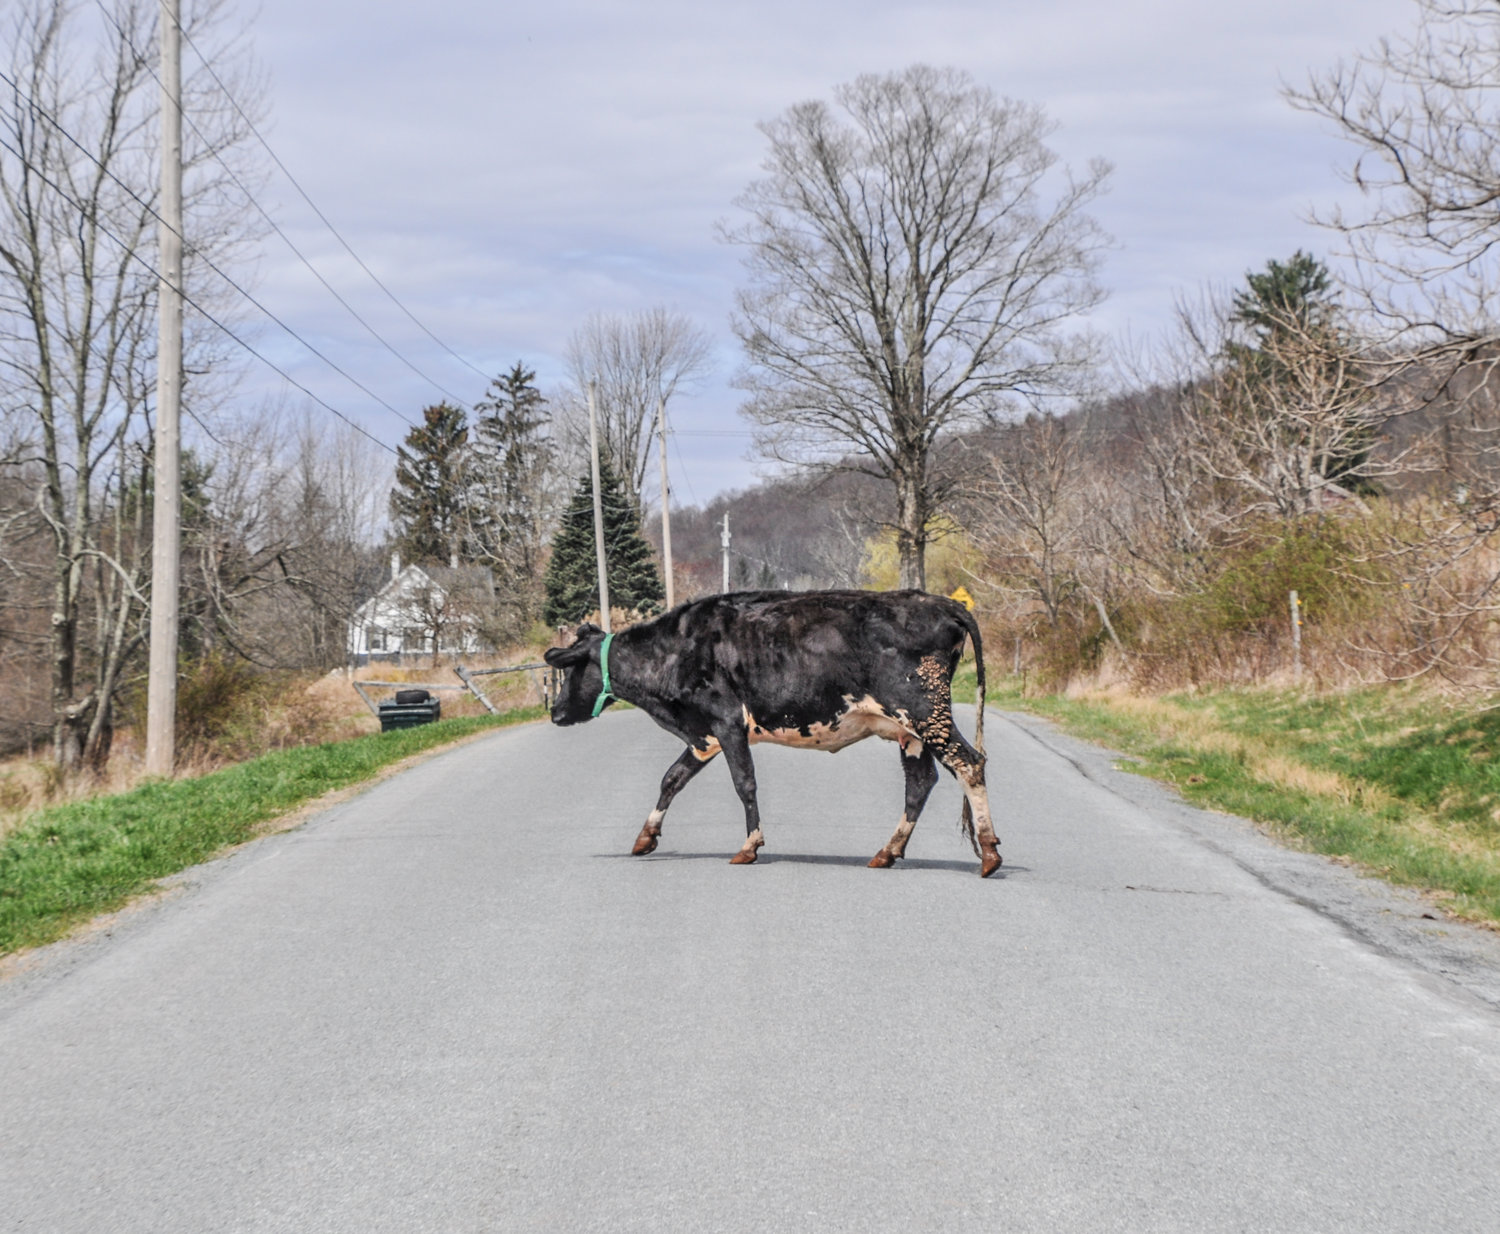 A friendly cow crossed the road to check out all of the excitement. We love cows.